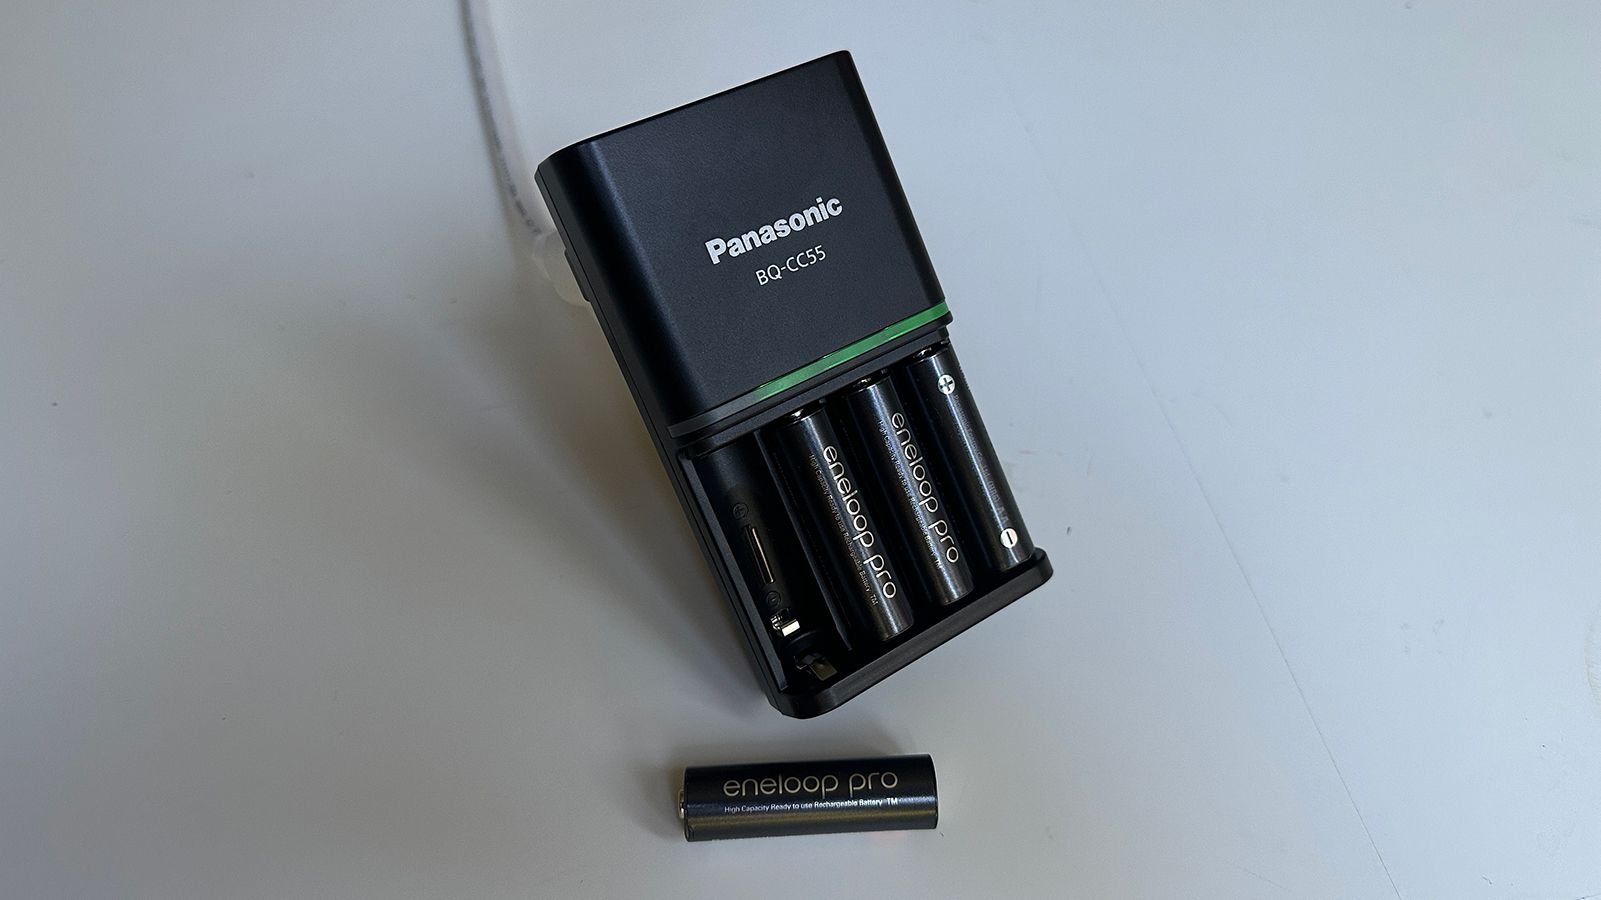 New rechargeable lithium AA batteries tested against eneloop, one